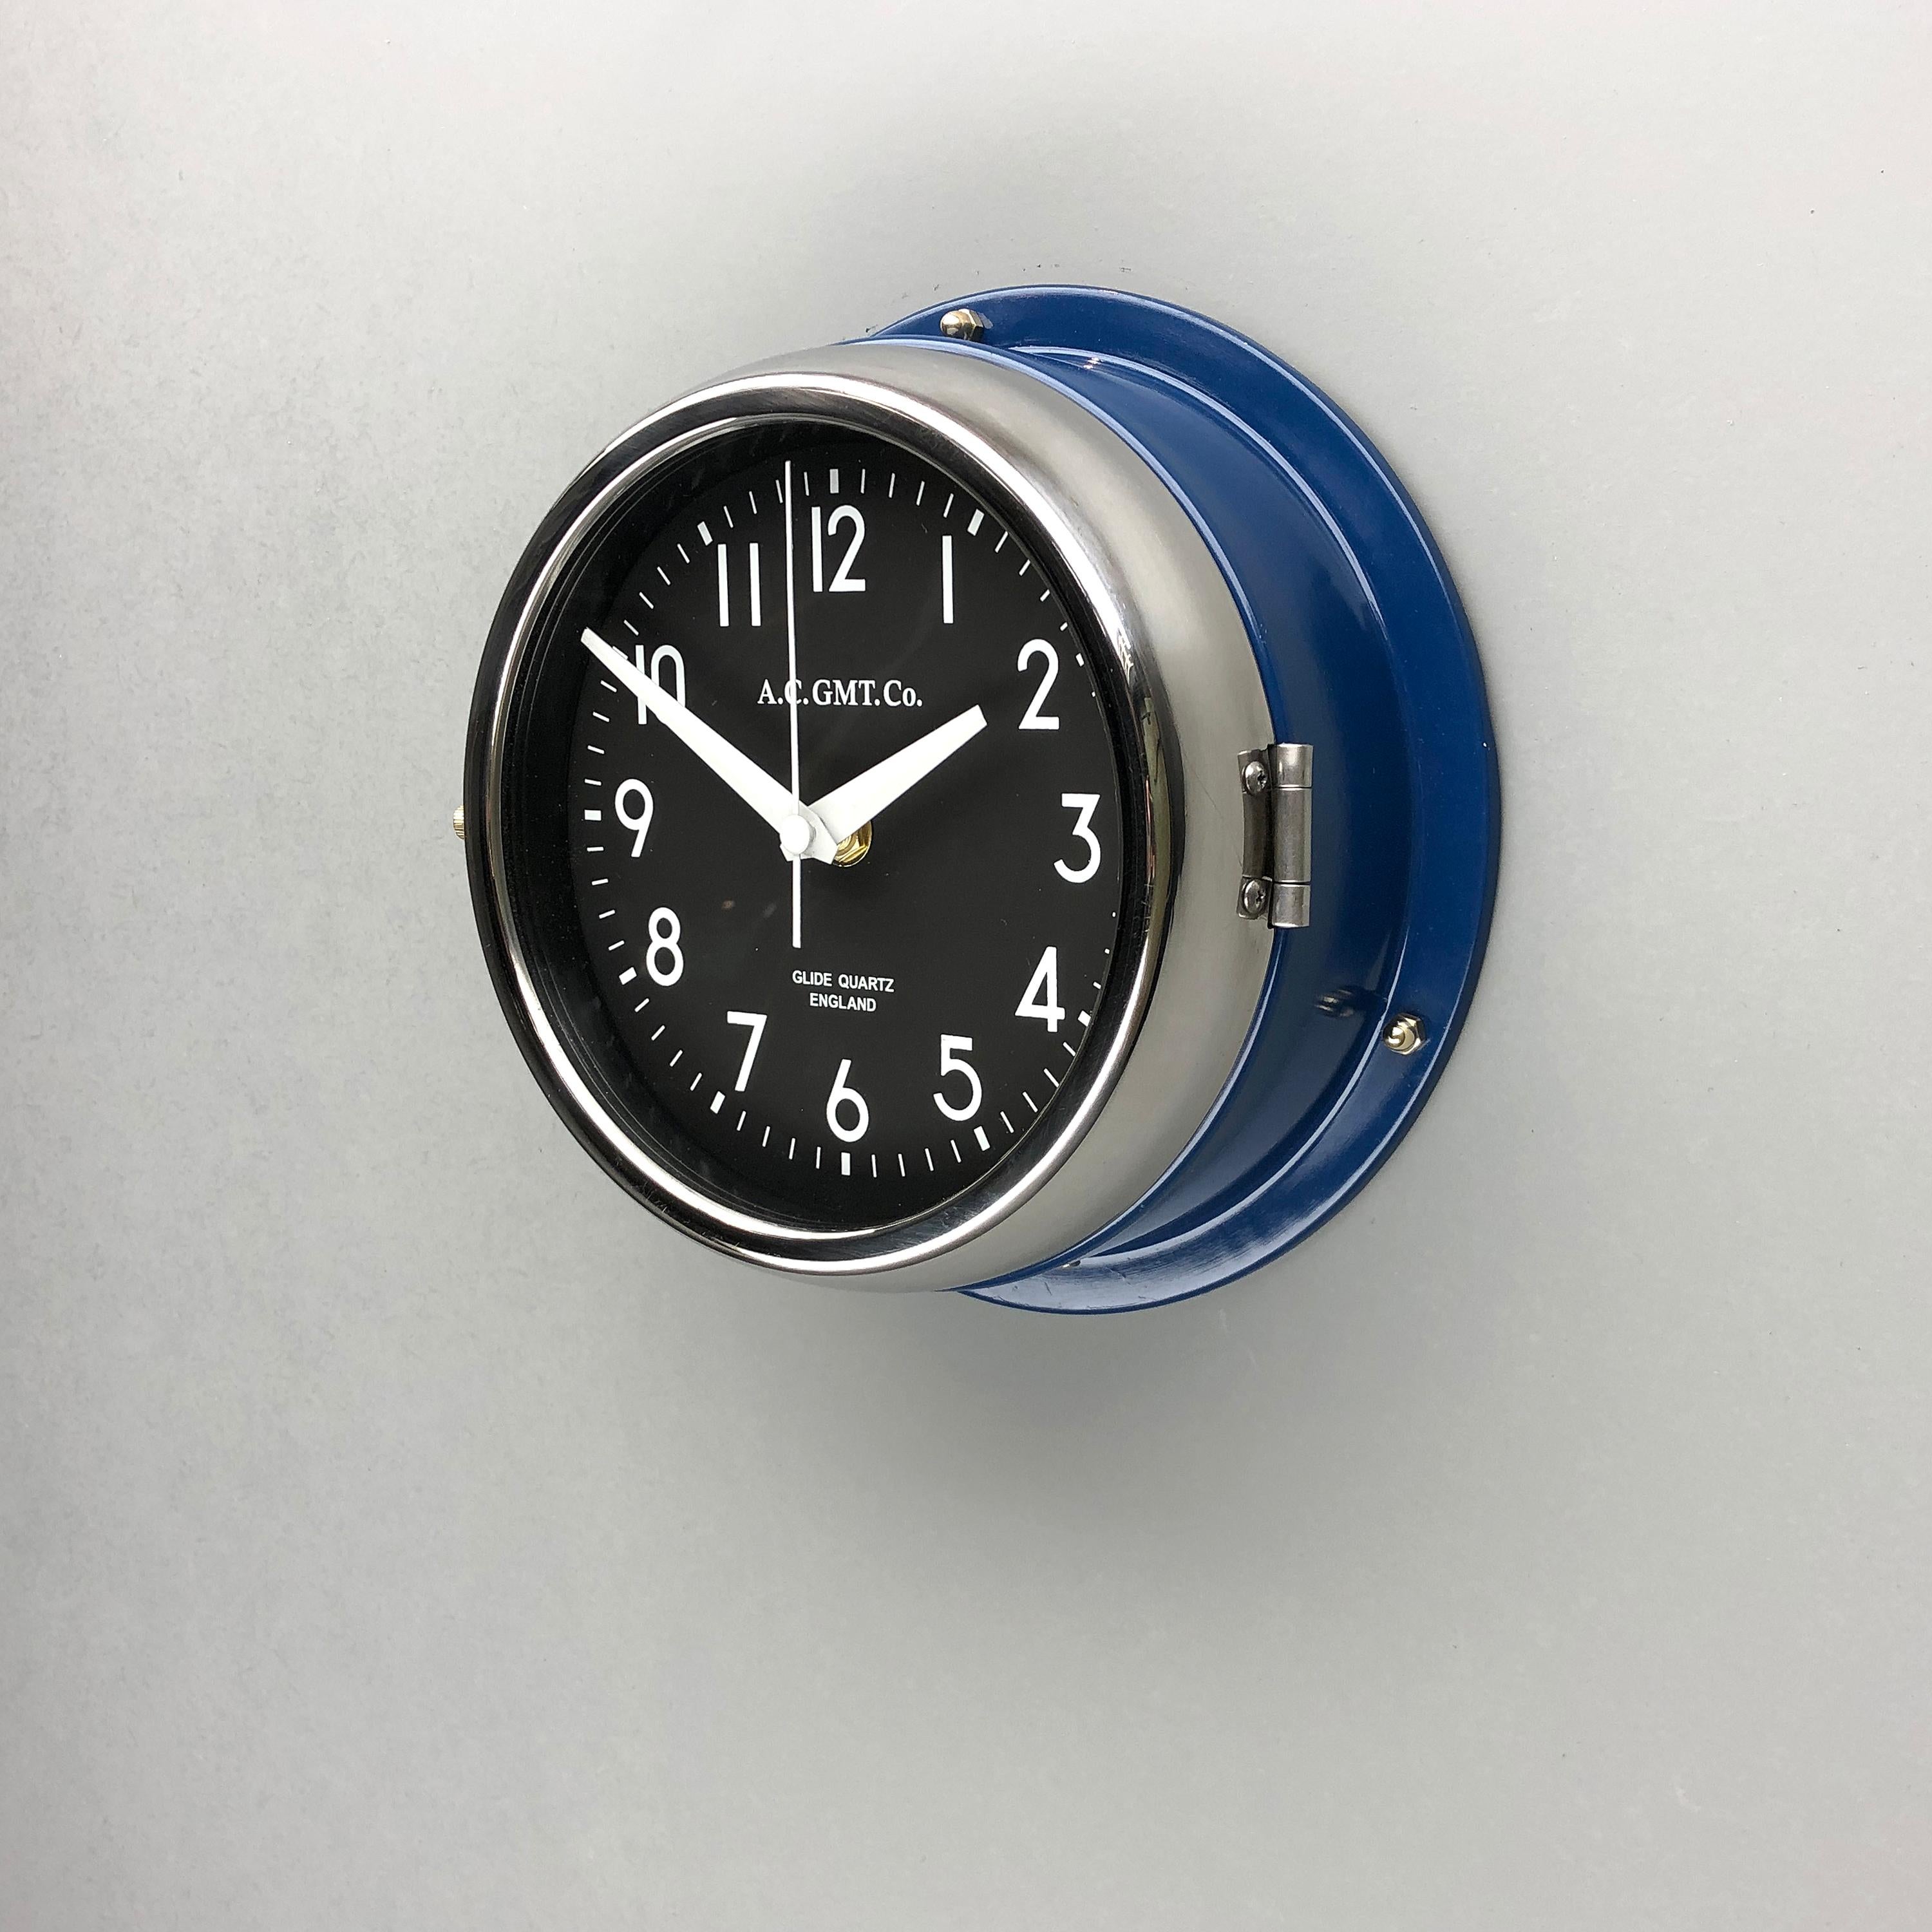 1970s British Classic Blue & Chrome AC.GMT.Co. Industrial Wall Clock Black Dial 2